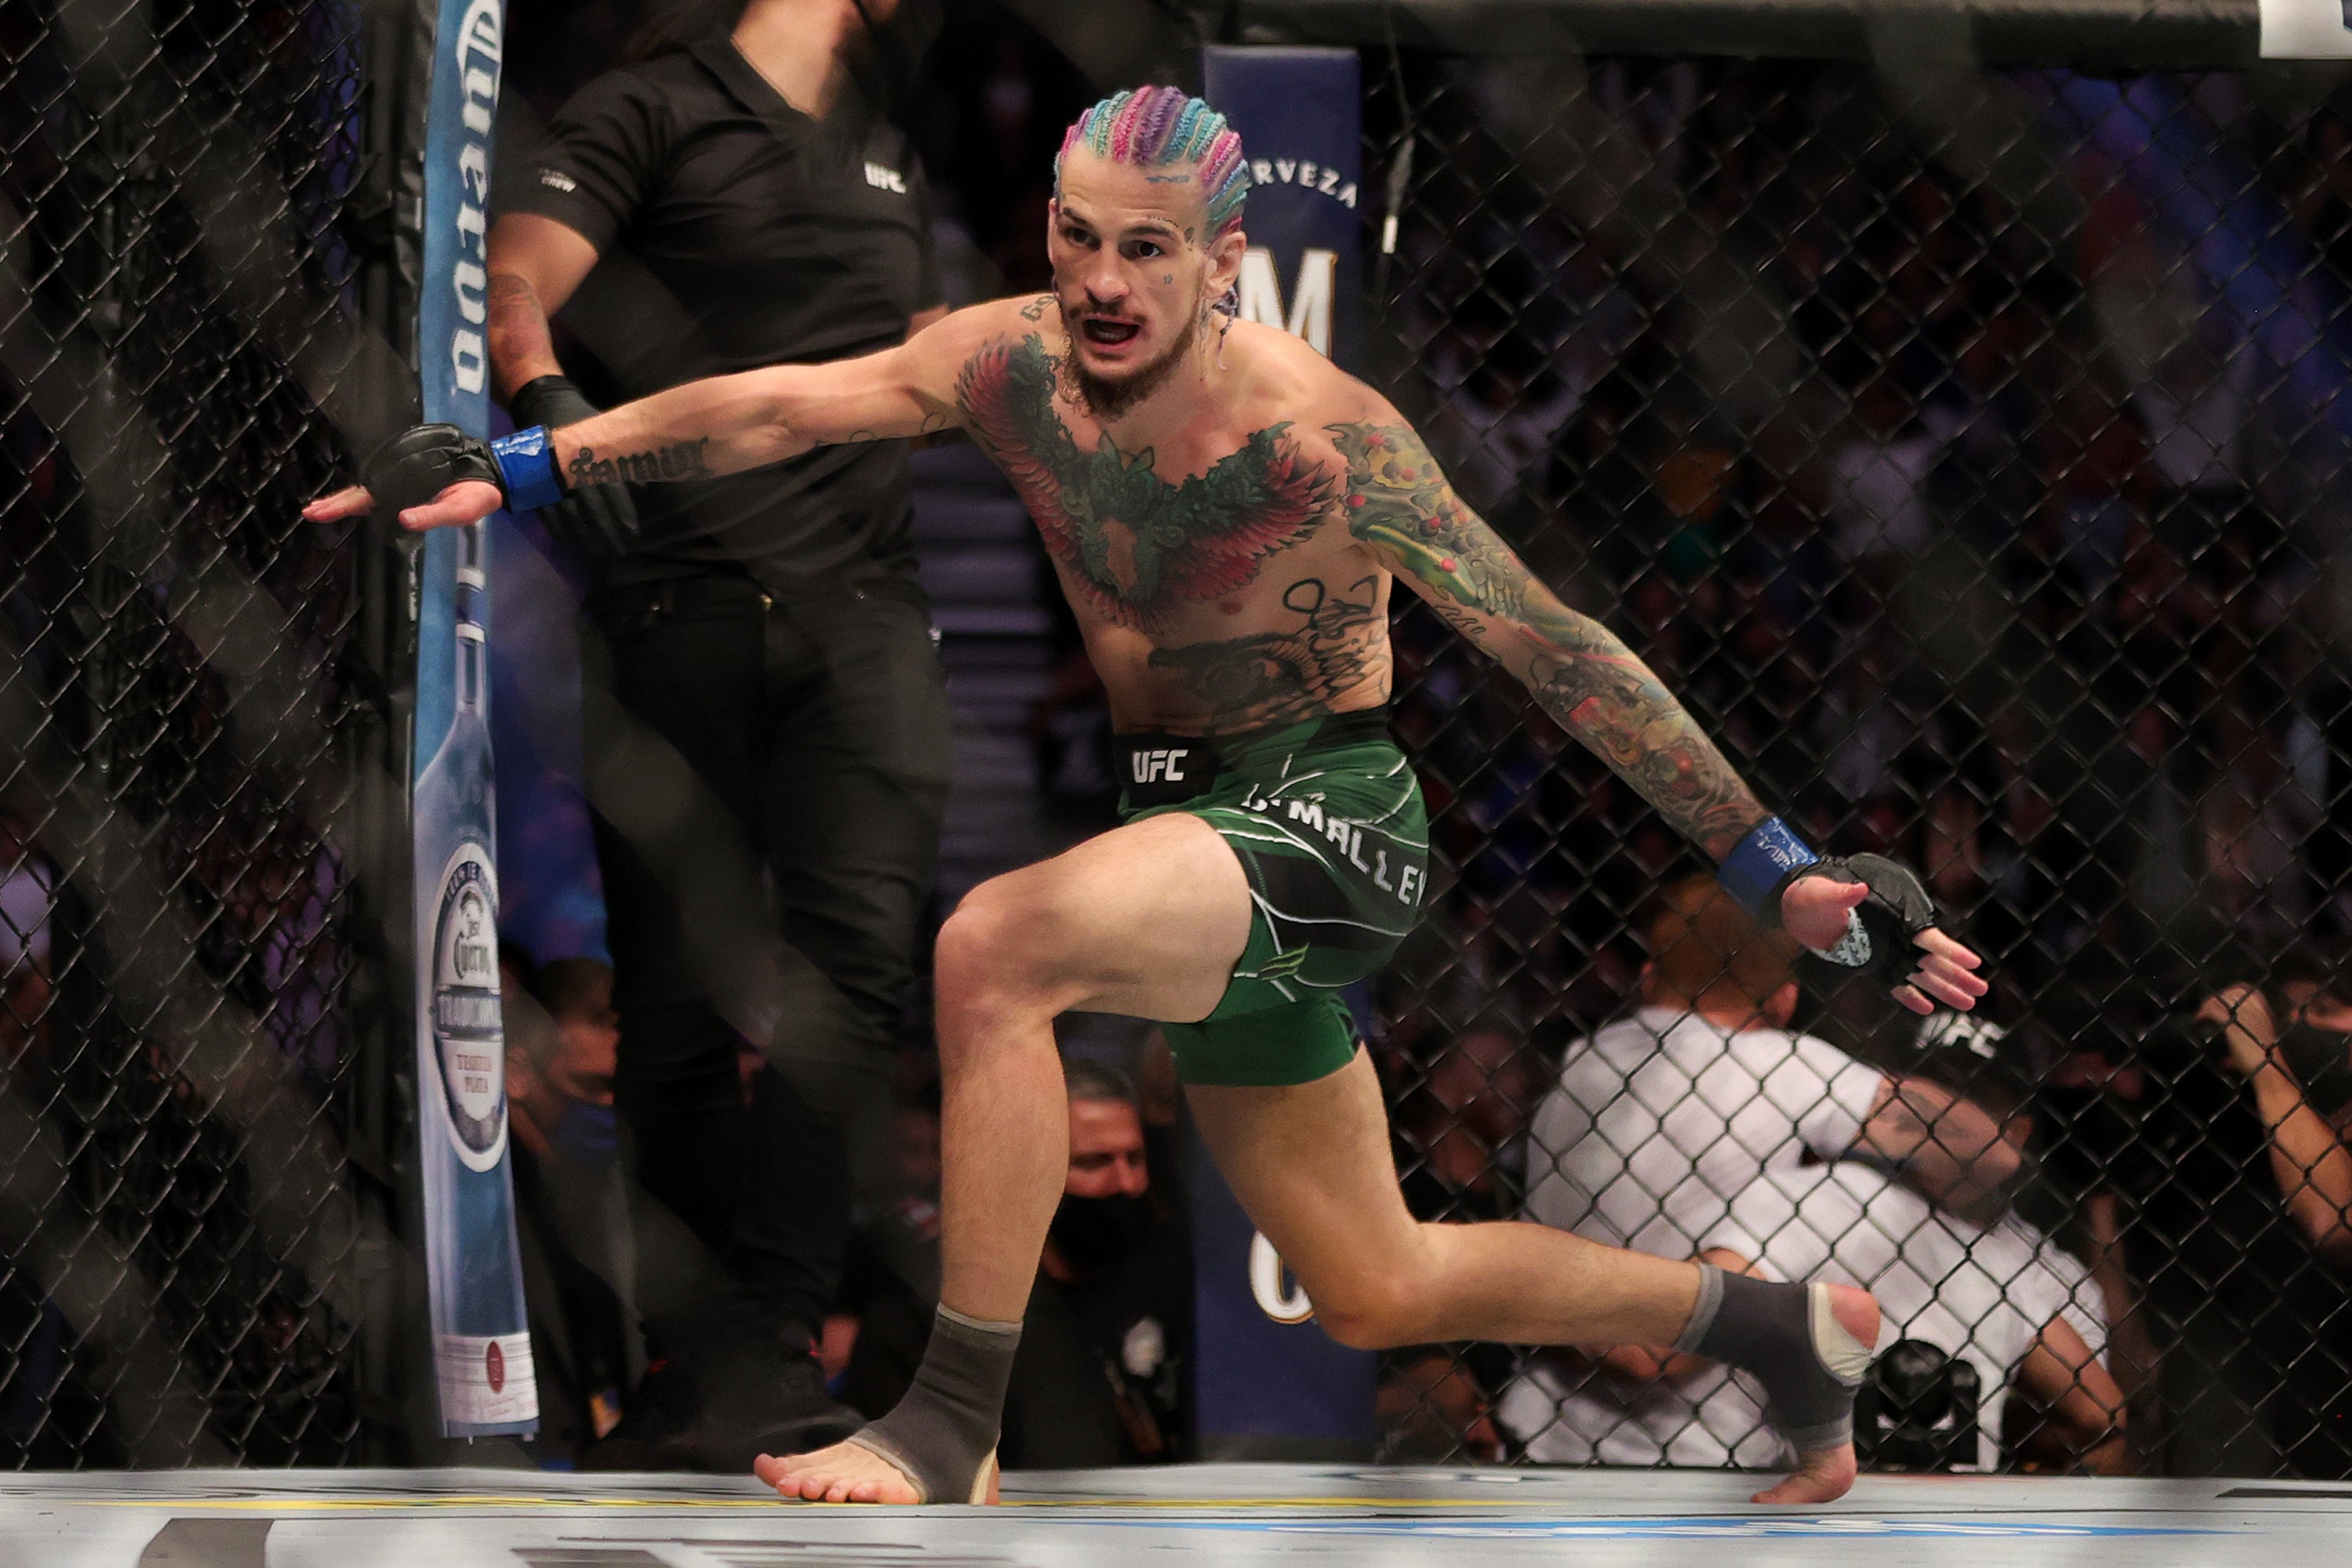 Sean O’Malley is a potential future star for the UFC